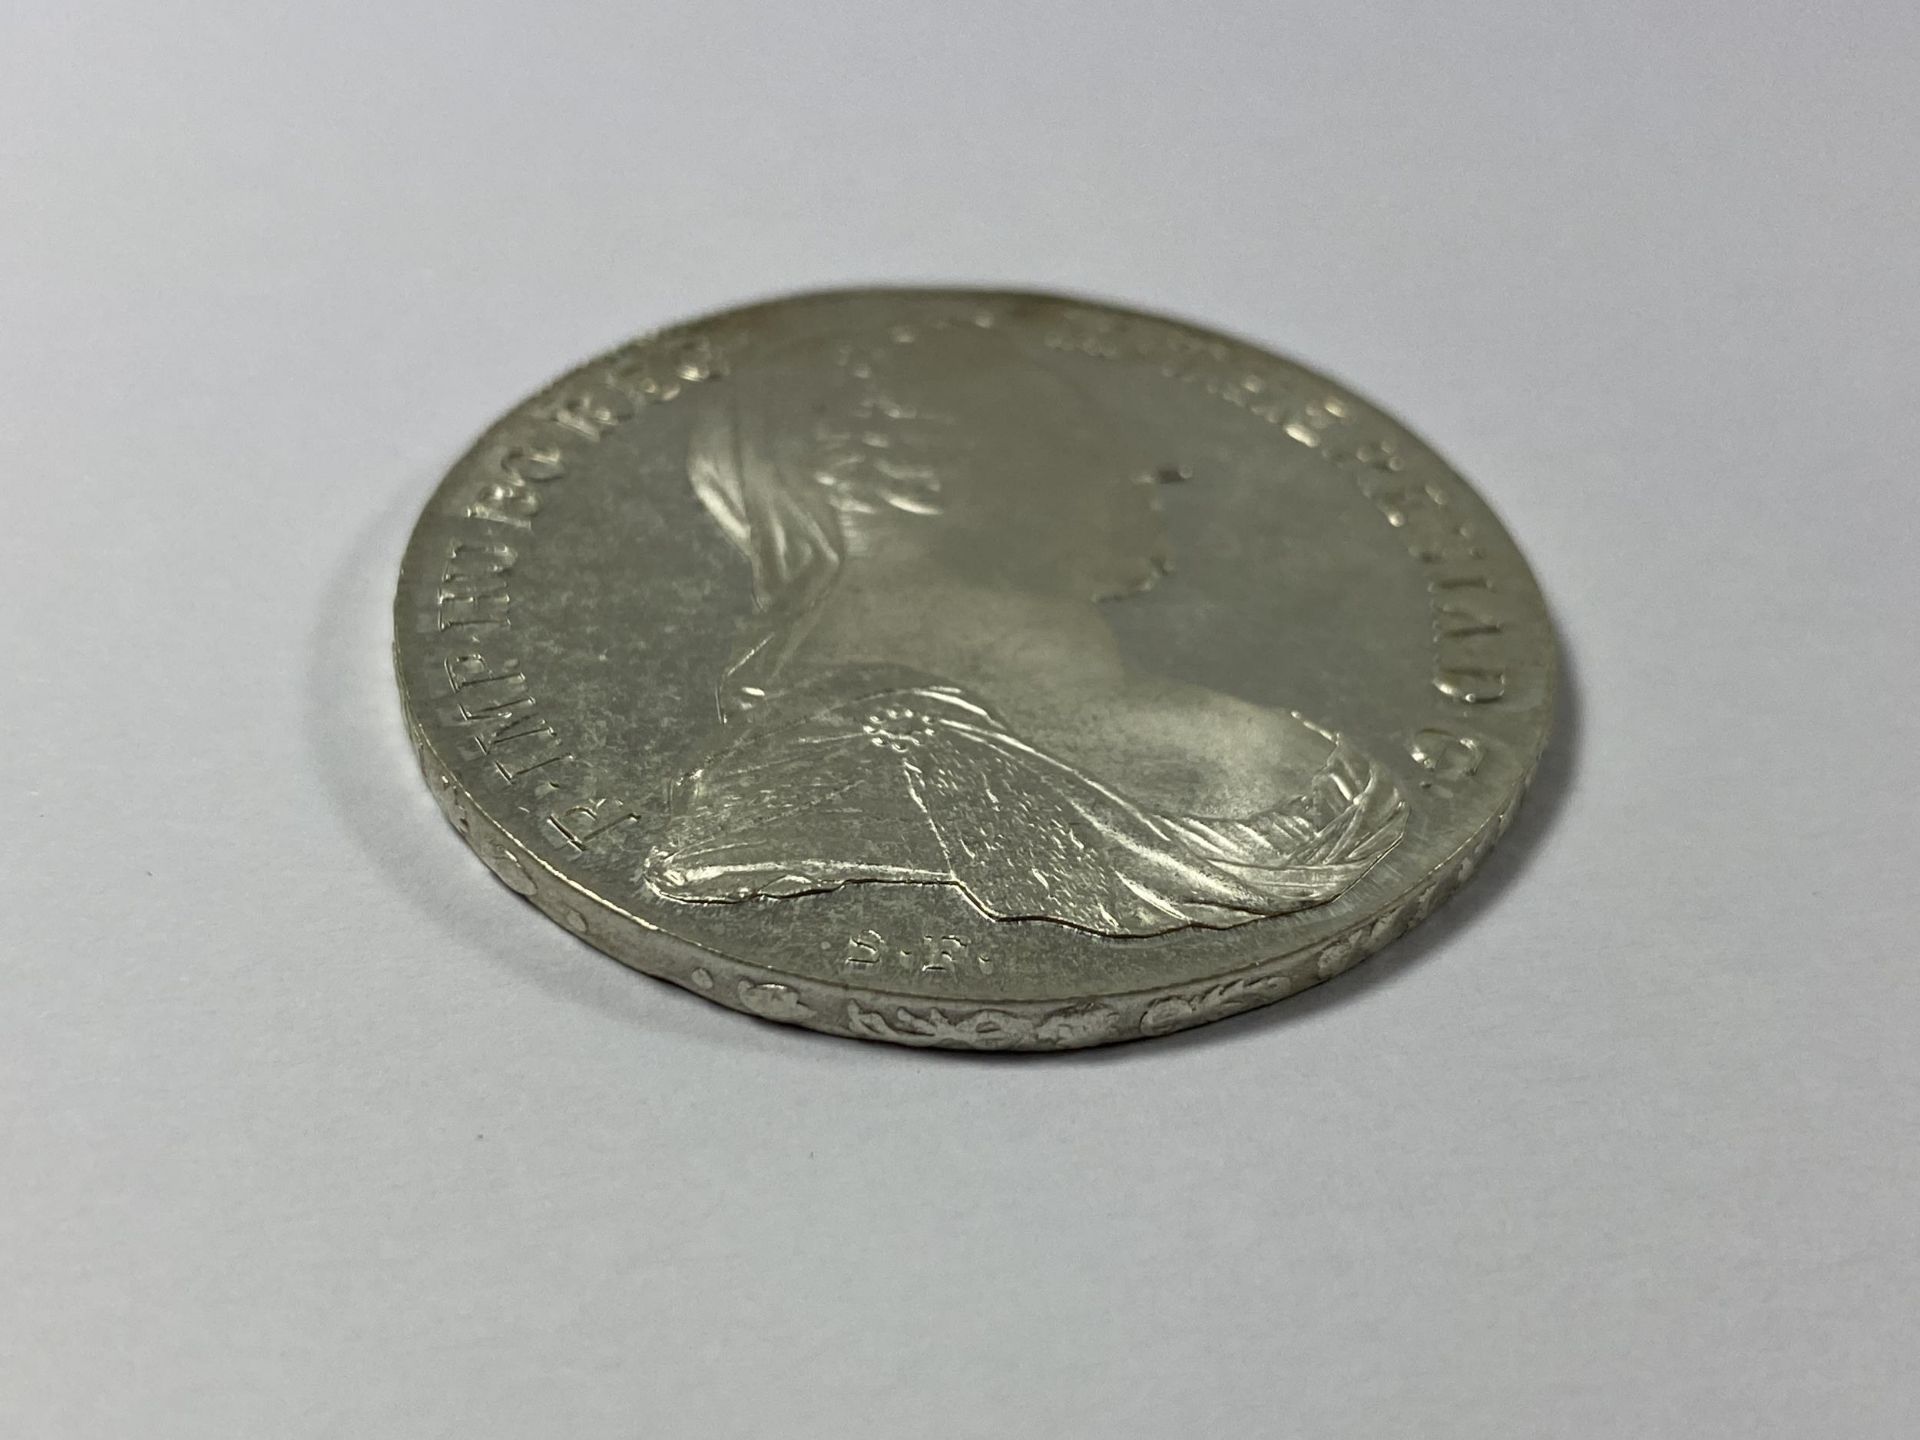 A MARIA THERESA SILVER THALER DATED 1780 - Image 4 of 4